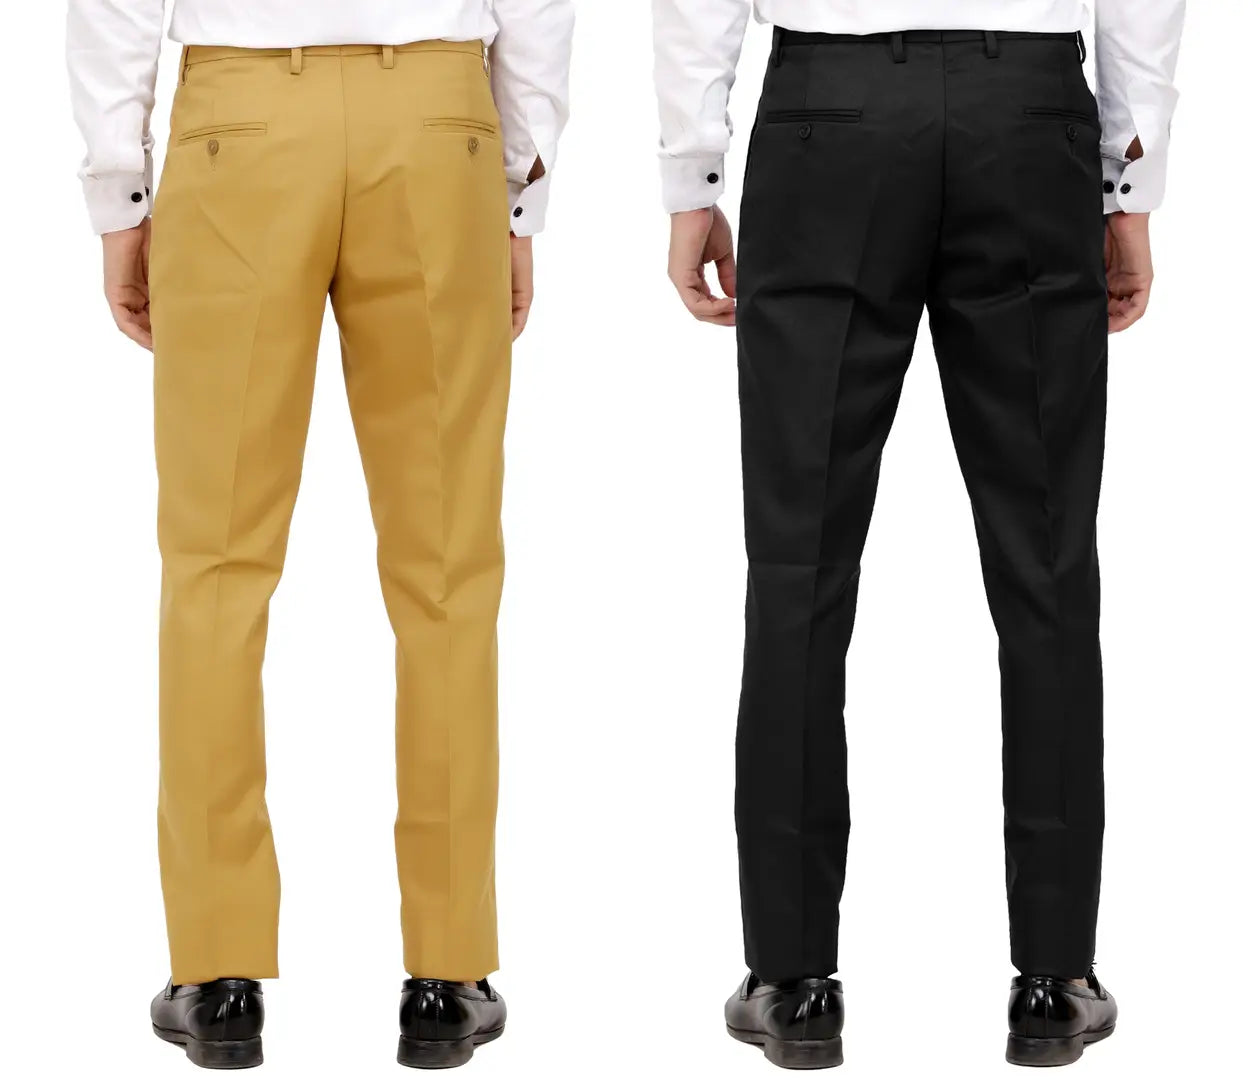 Kundan Men Poly-Viscose Blended Khaki and Black Formal Trousers ( Pack of 2 Trousers )